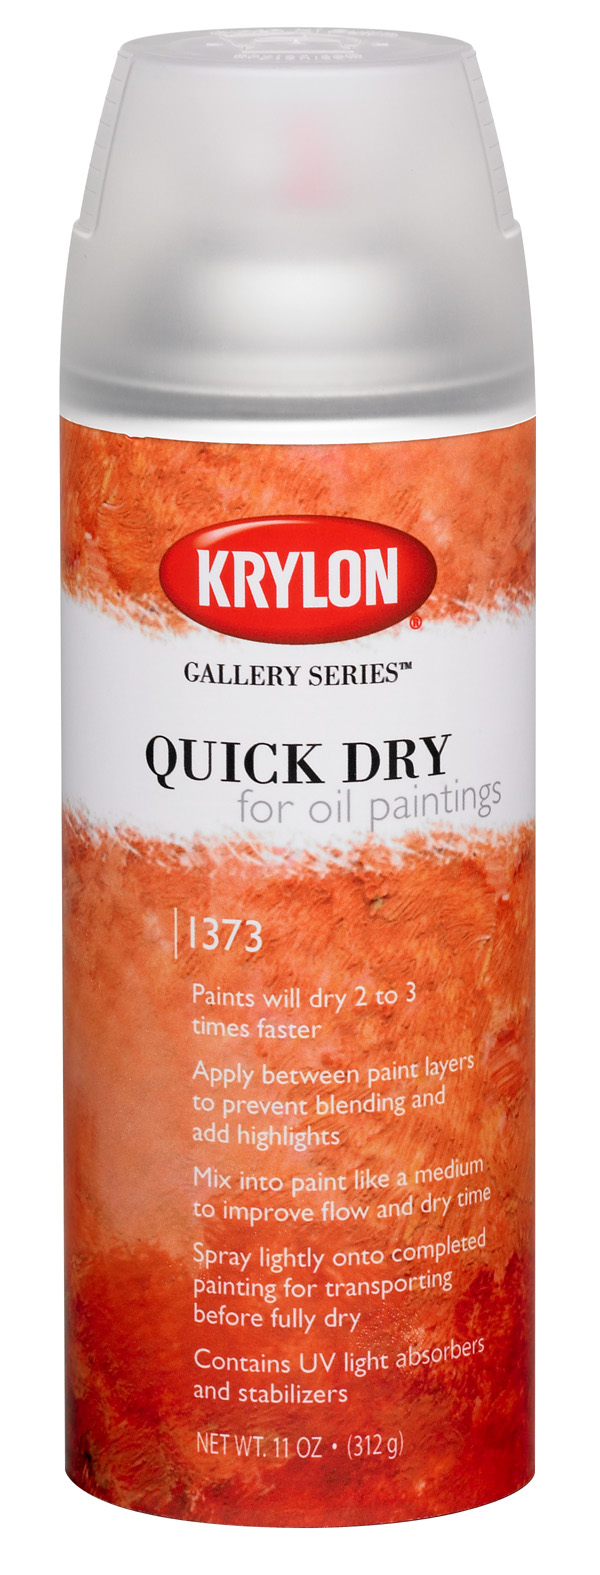 How to use Krylon® Gallery Series Quick Dry for Oil Paintings